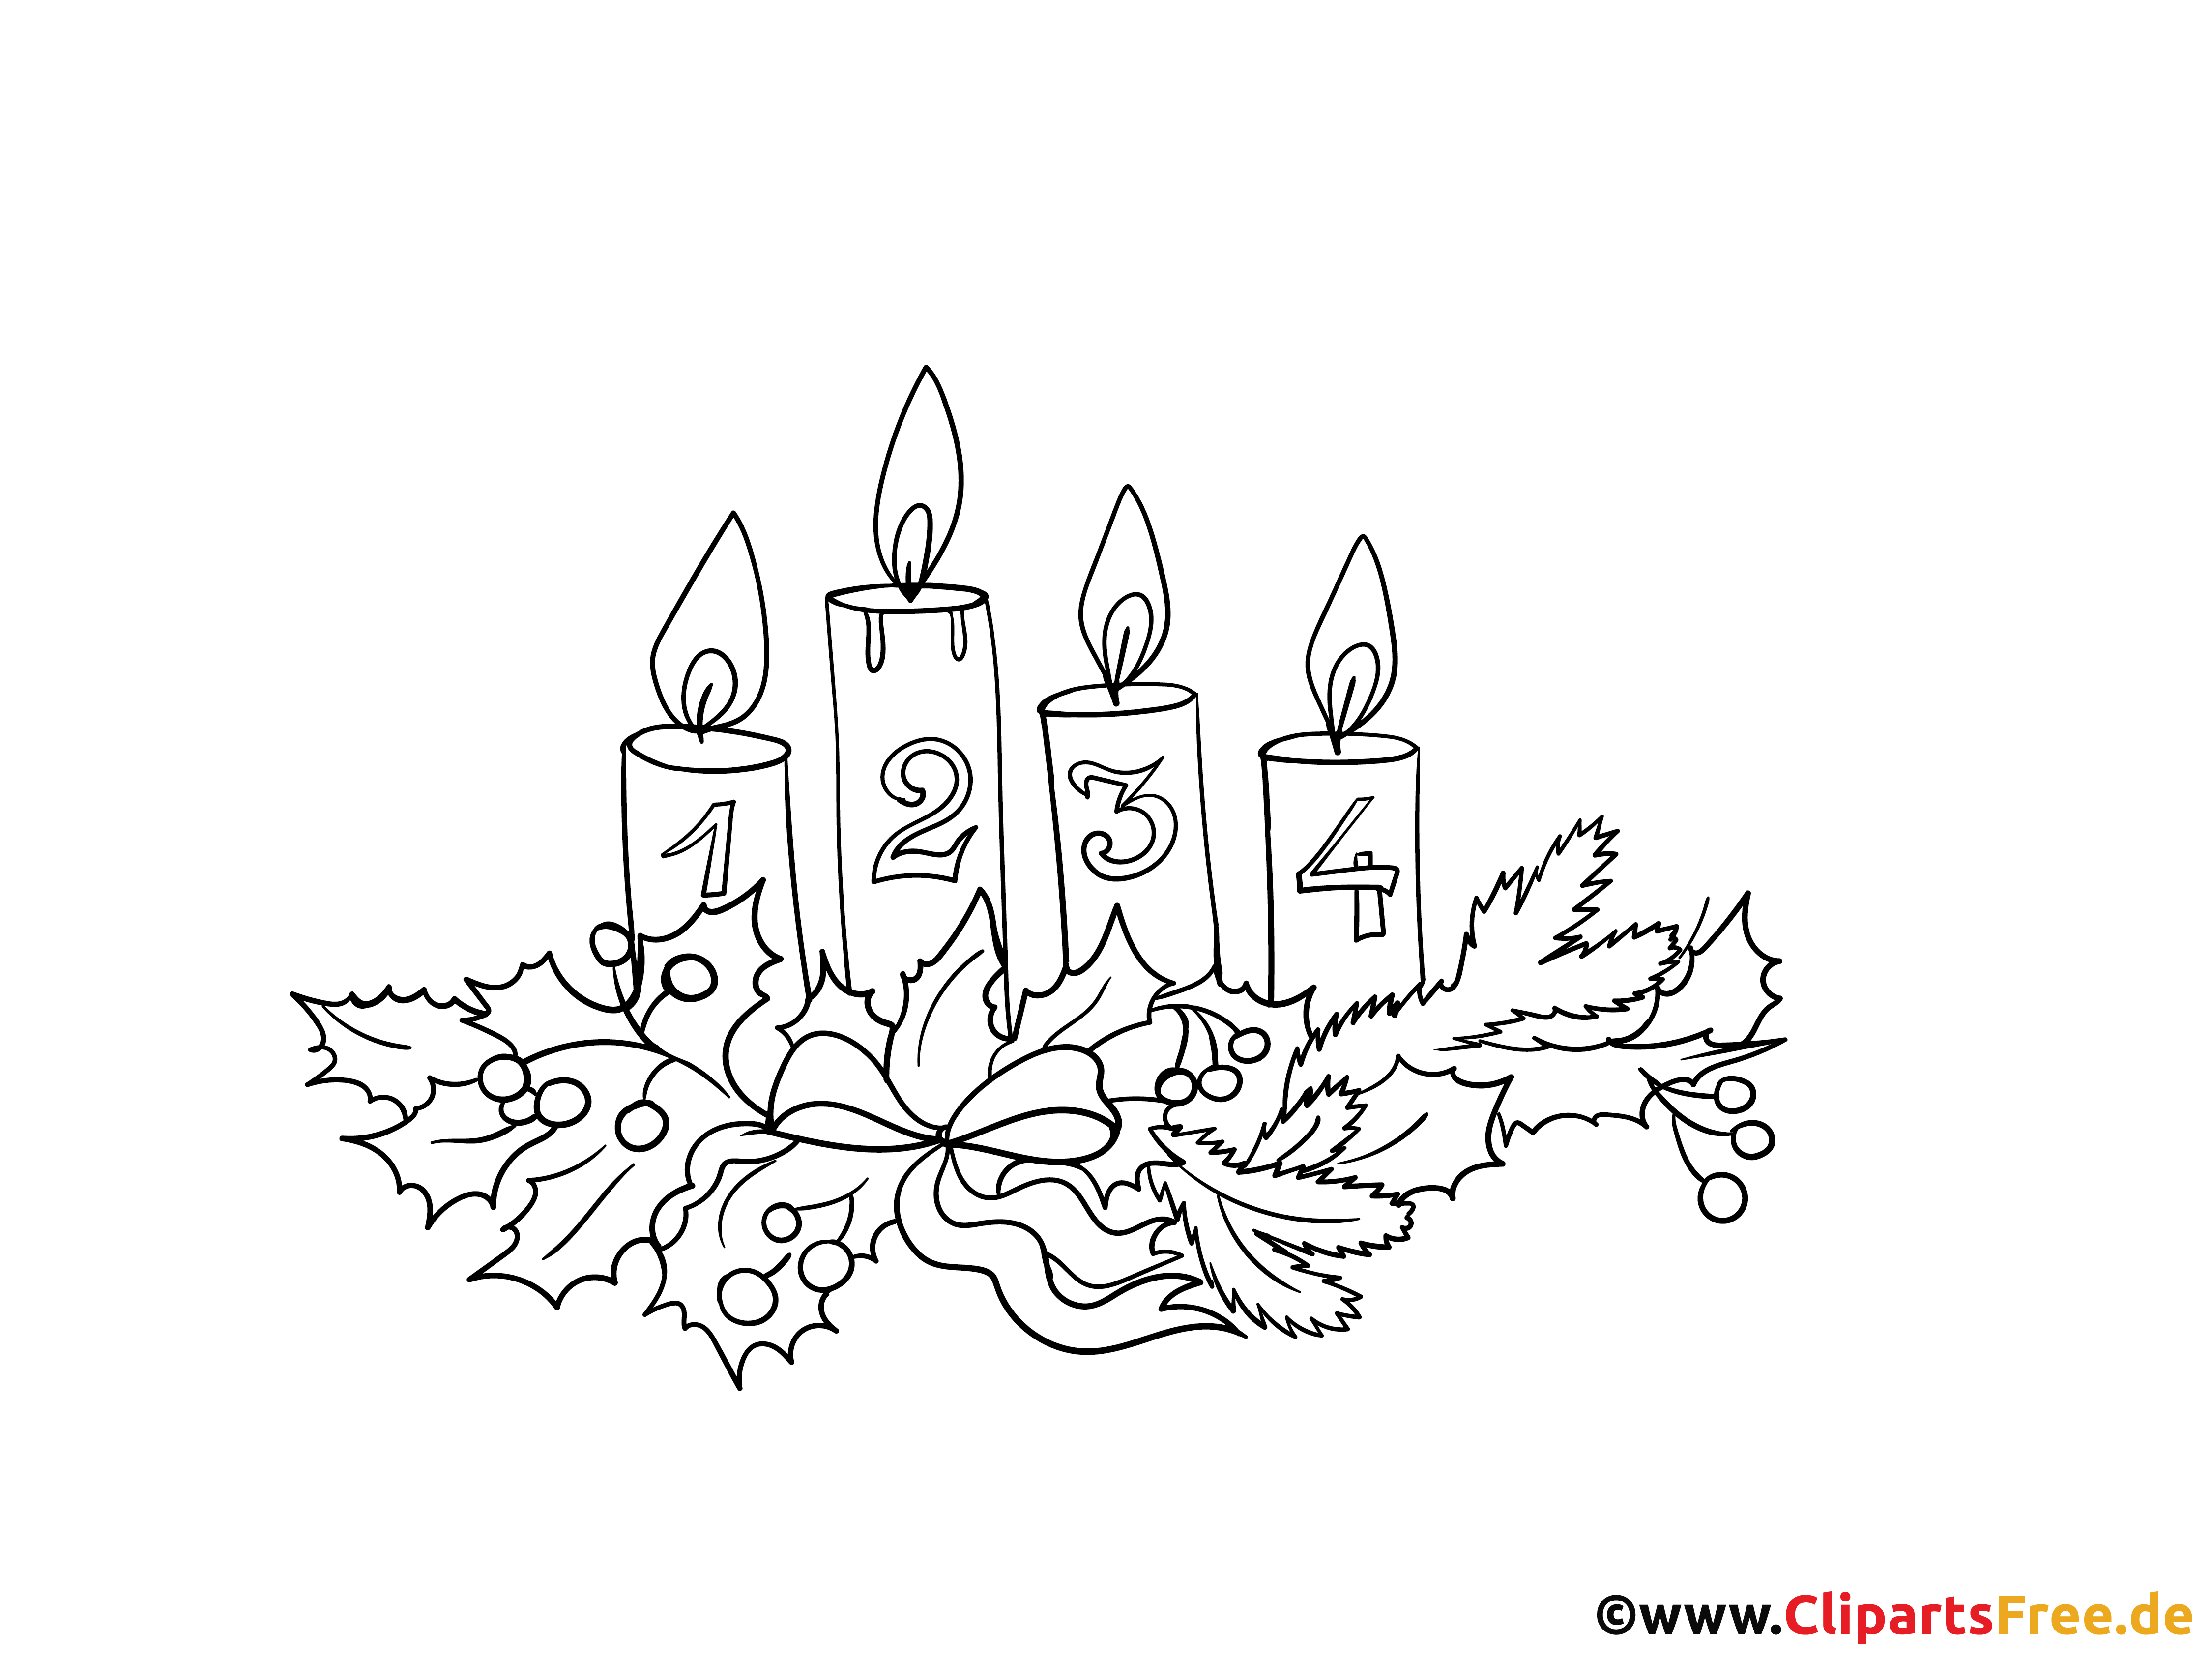 Advent clipart black and white